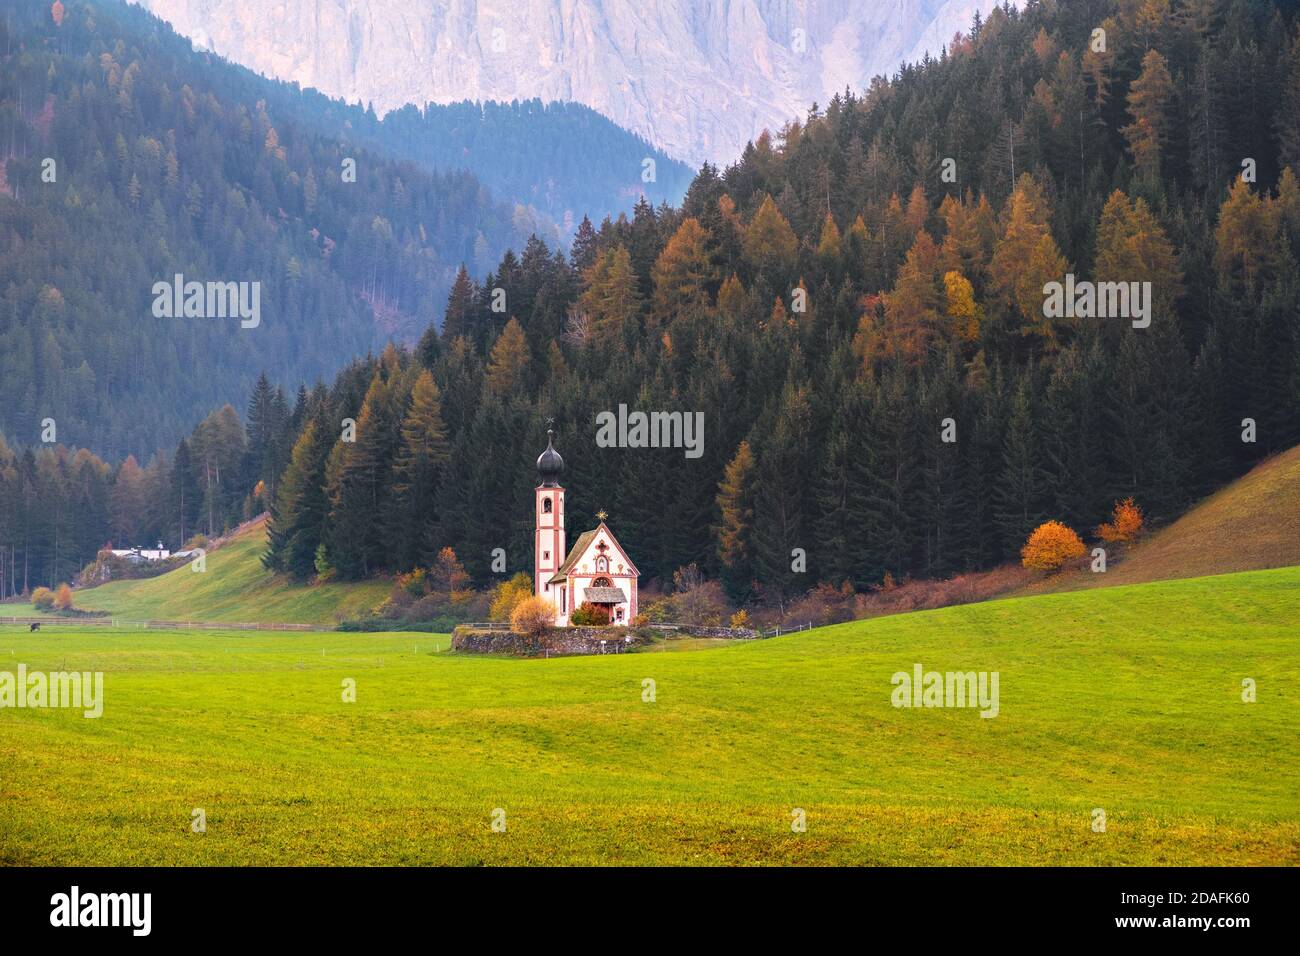 Famous and charming village of Santa Maddalena in the background of the Odle mountain range, Funes valley Trentino Alto Adige region in Italy Stock Photo